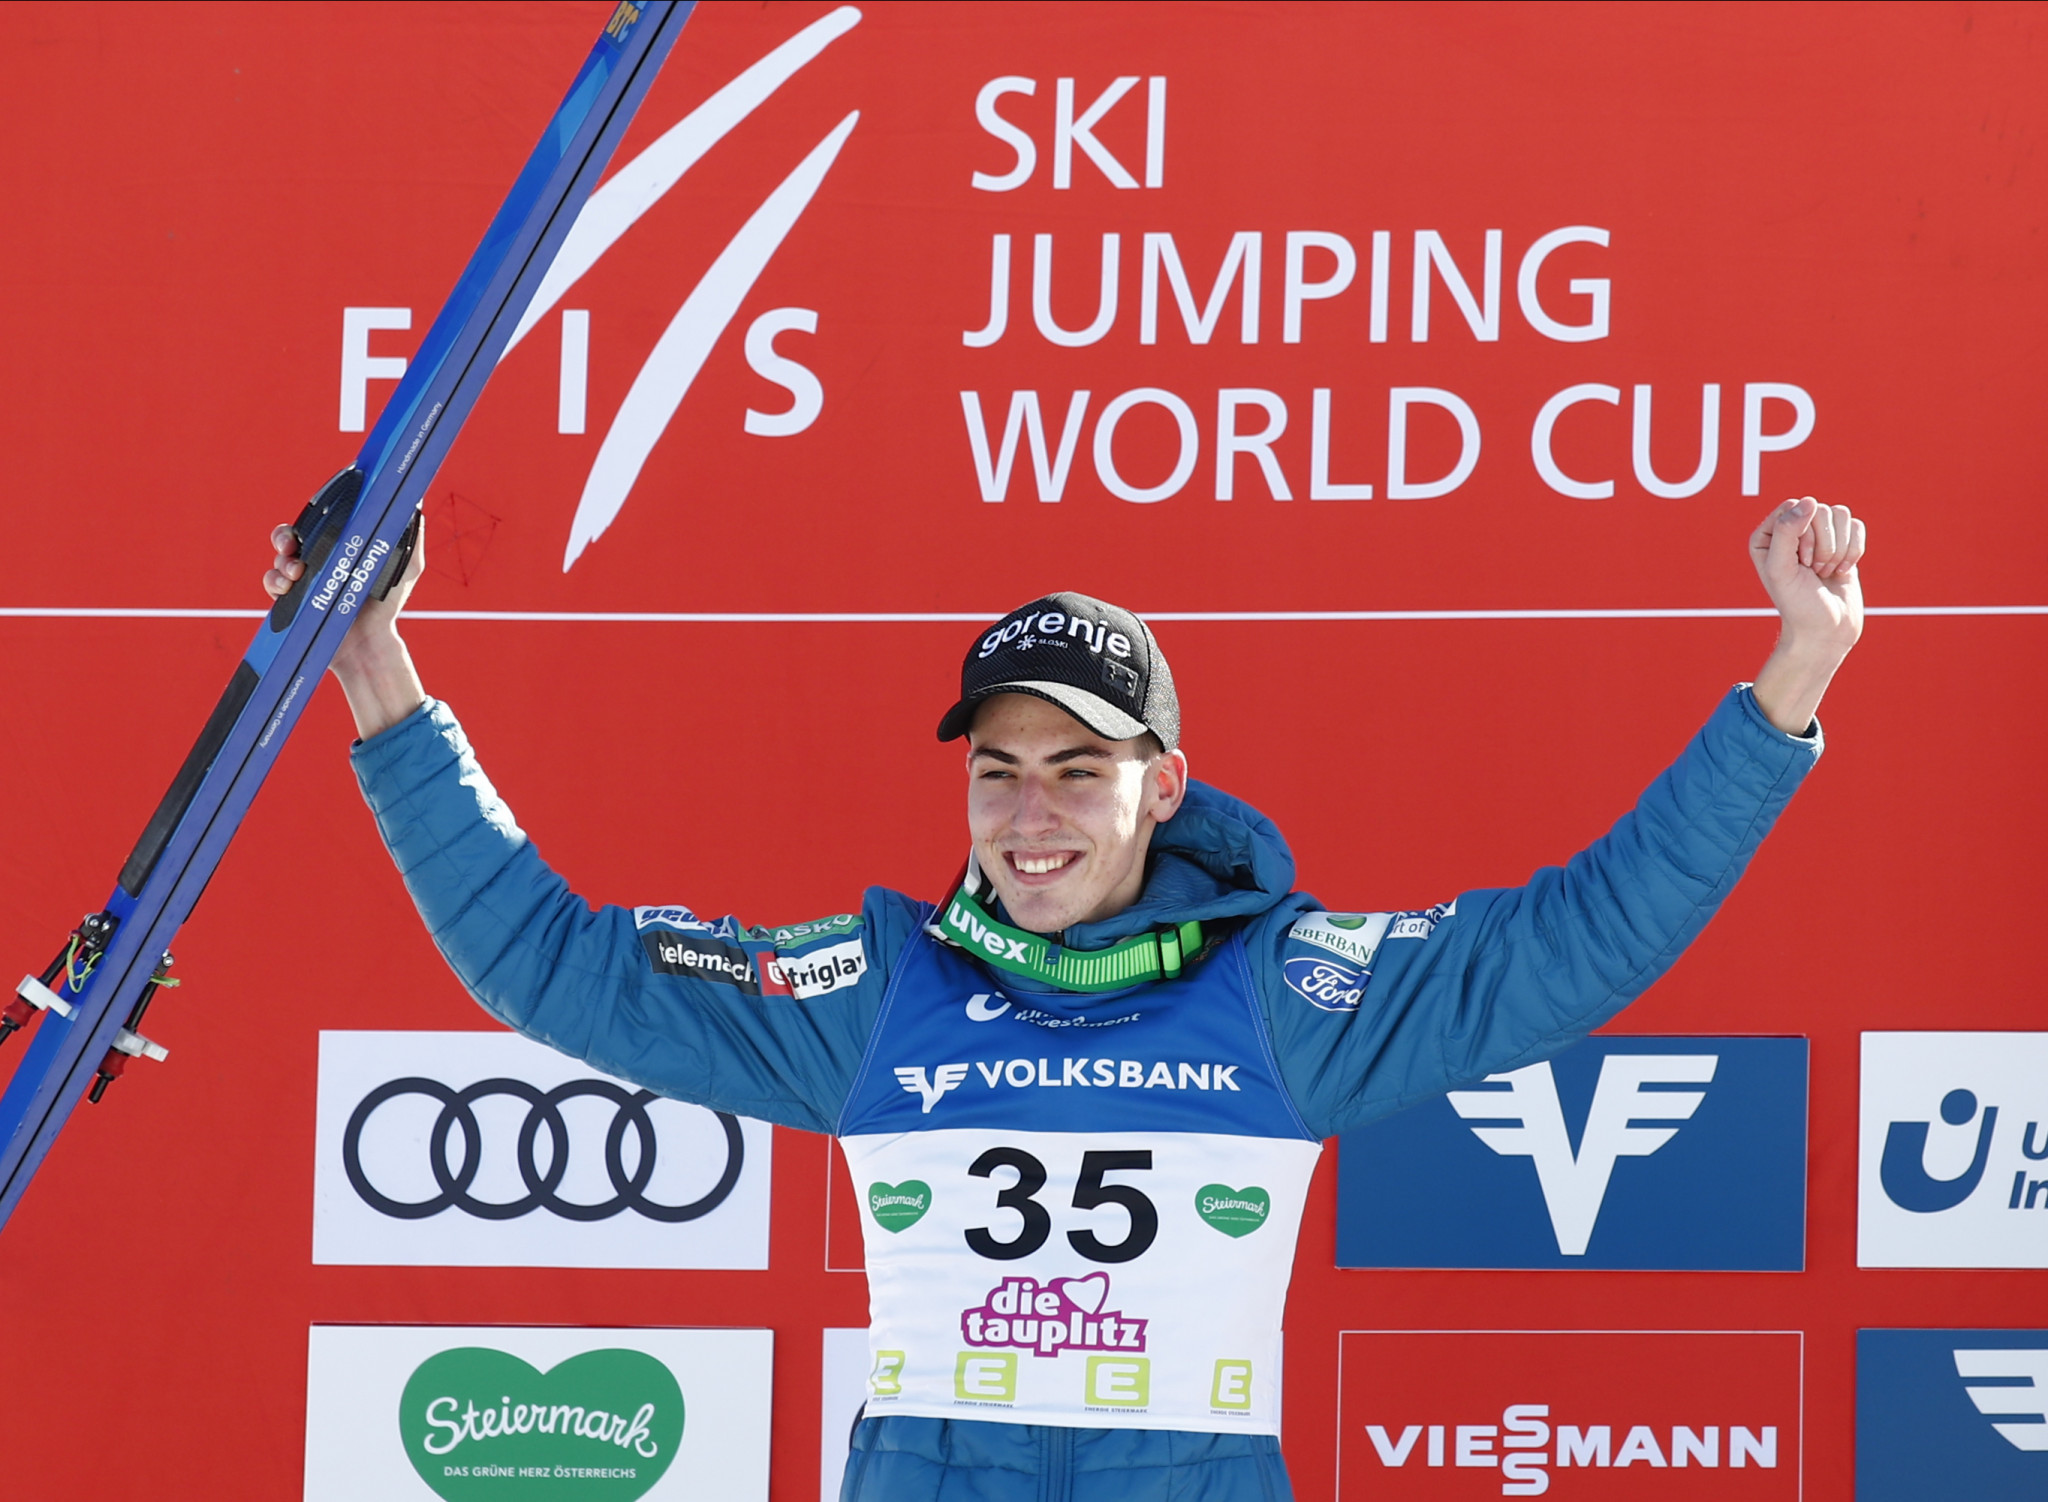 Slovenia's 19-year-old Timi Zajc had his best World Cup performance of the season after narrowly missing the gold medal ©Getty Images